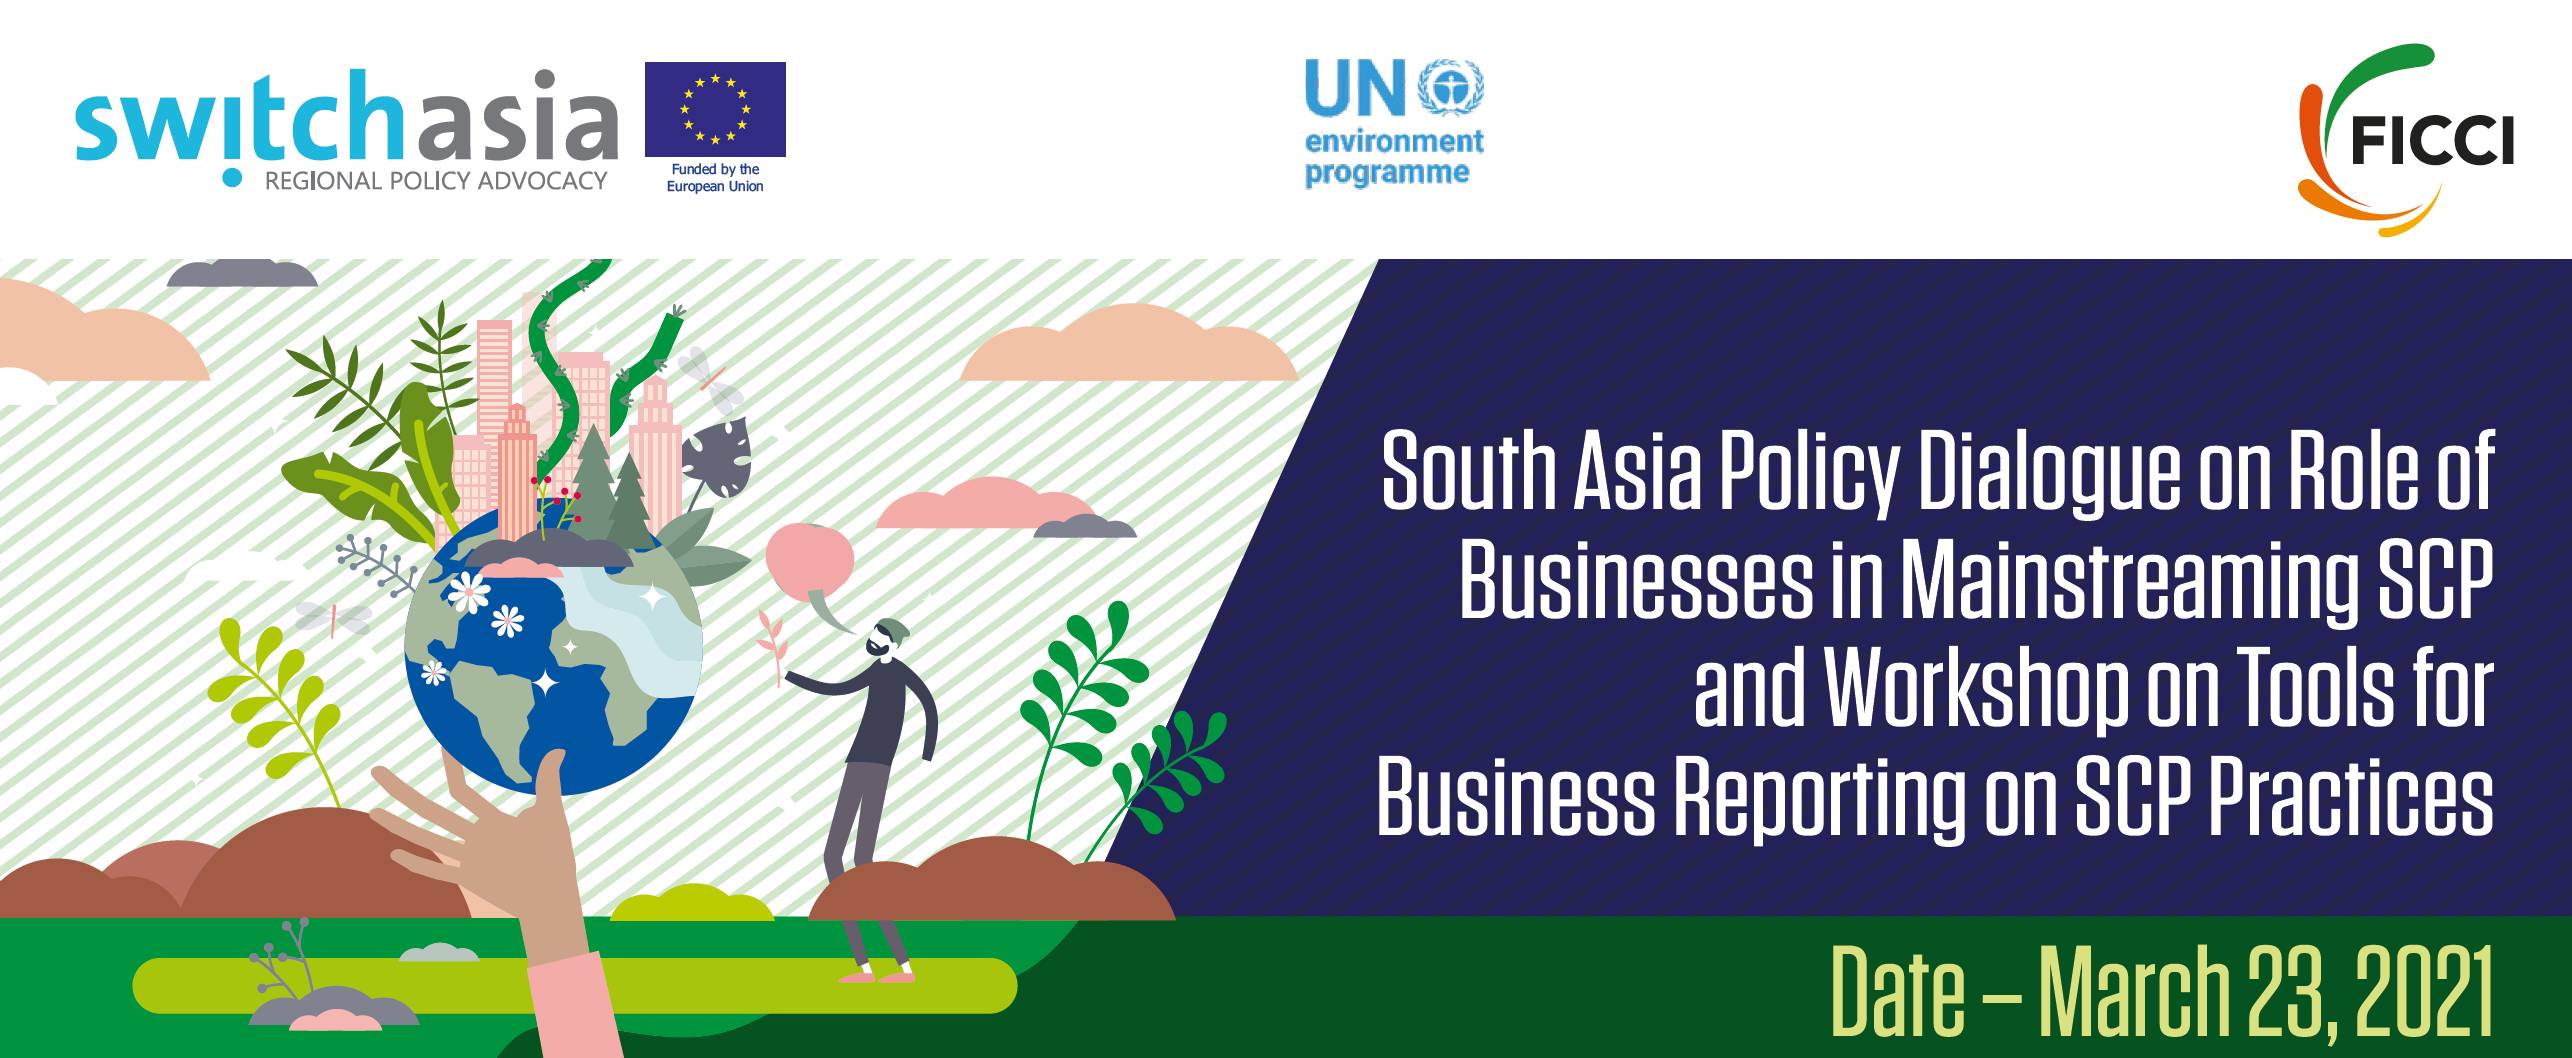 South Asia Policy Dialogue: Role of Businesses in Mainstreaming SCP & Workshop on Tools for Business Reporting on SCP Practices